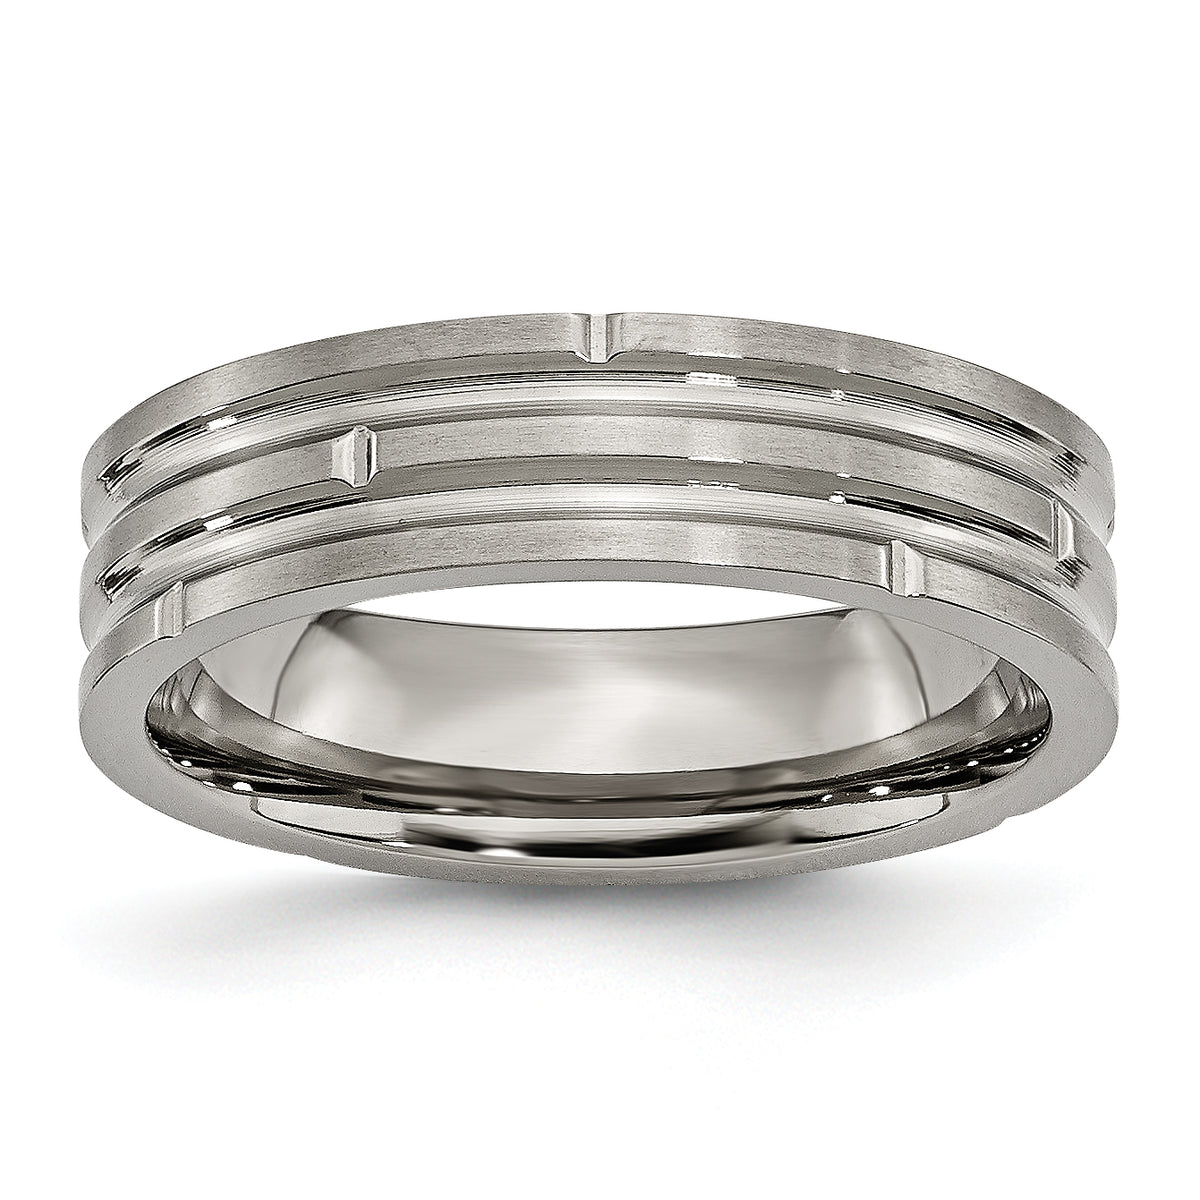 Titanium Polished and Satin 6mm Grooved Band